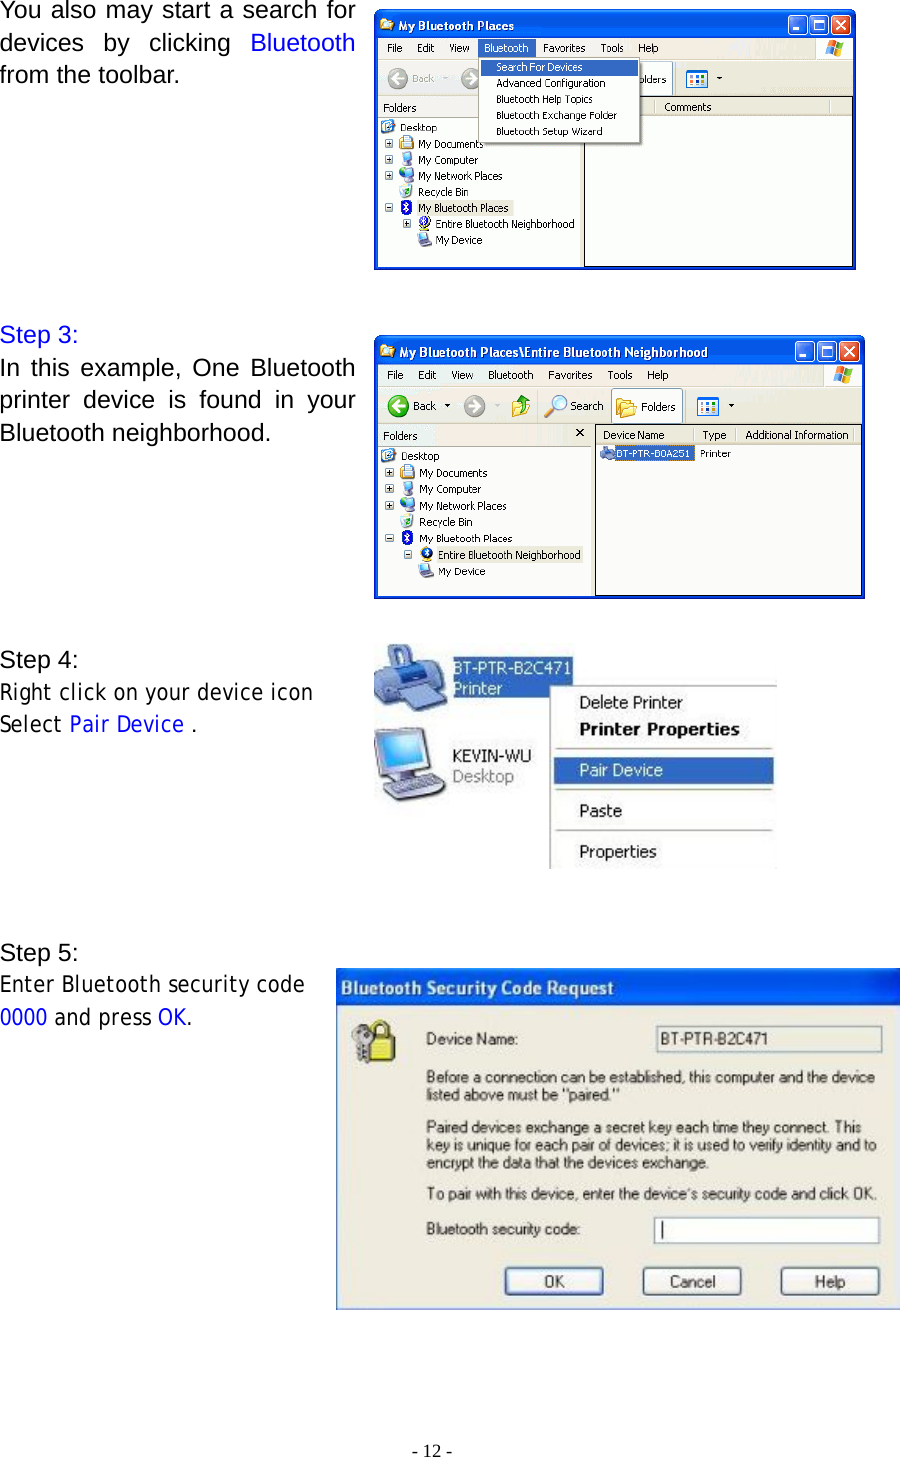  - 12 - You also may start a search for devices by clicking Bluetooth from the toolbar.        Step 3: In this example, One Bluetooth printer device is found in your Bluetooth neighborhood.       Step 4: Right click on your device icon  Select Pair Device .       Step 5: Enter Bluetooth security code 0000 and press OK.            